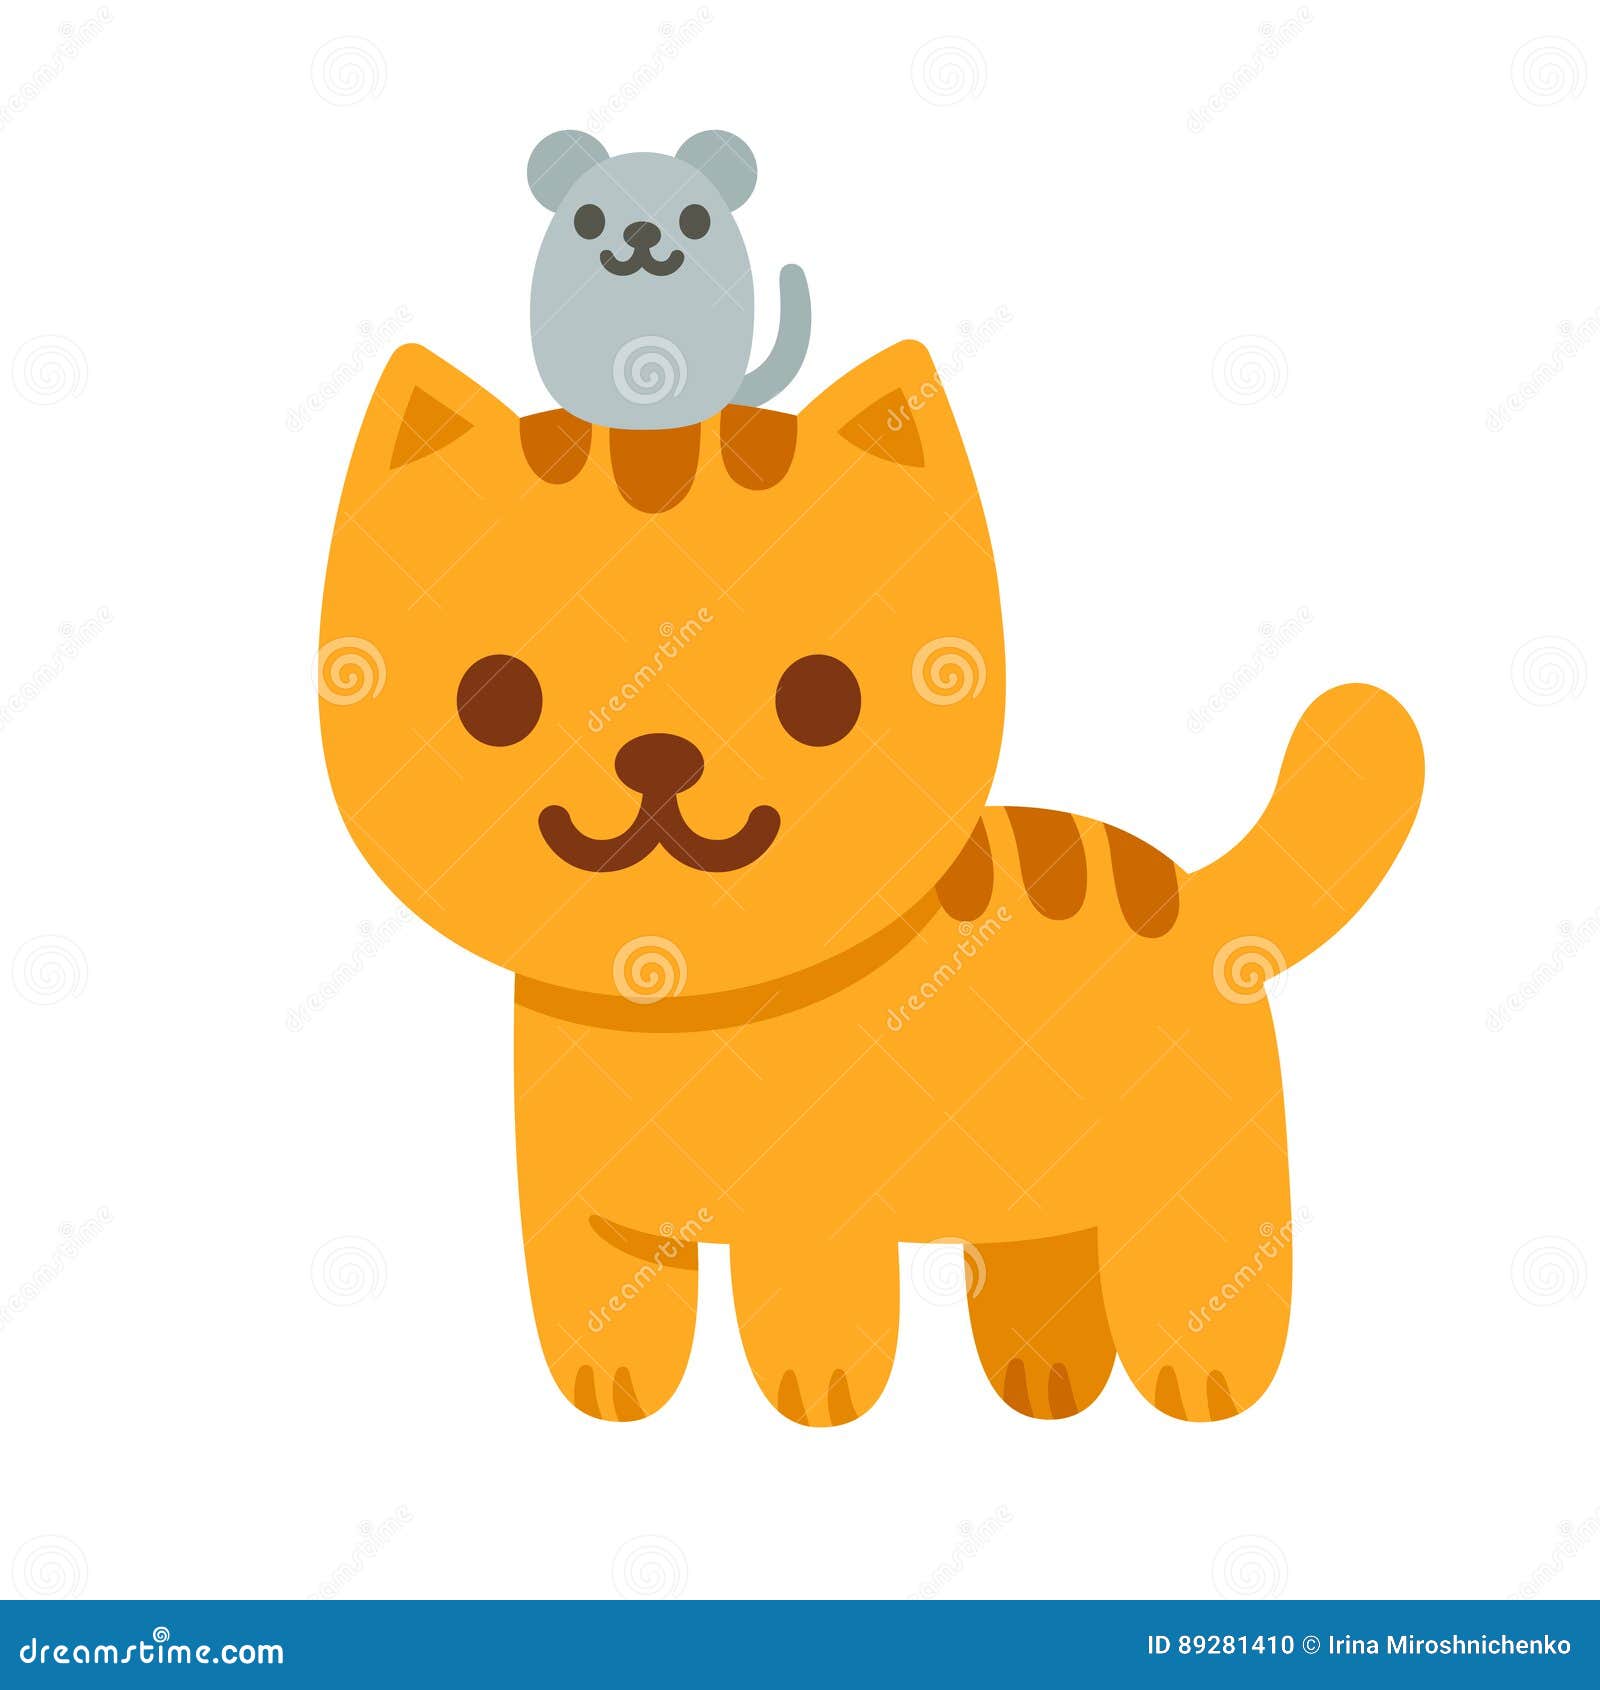 Cat and mouse cartoon stock vector. Illustration of icon - 89281410